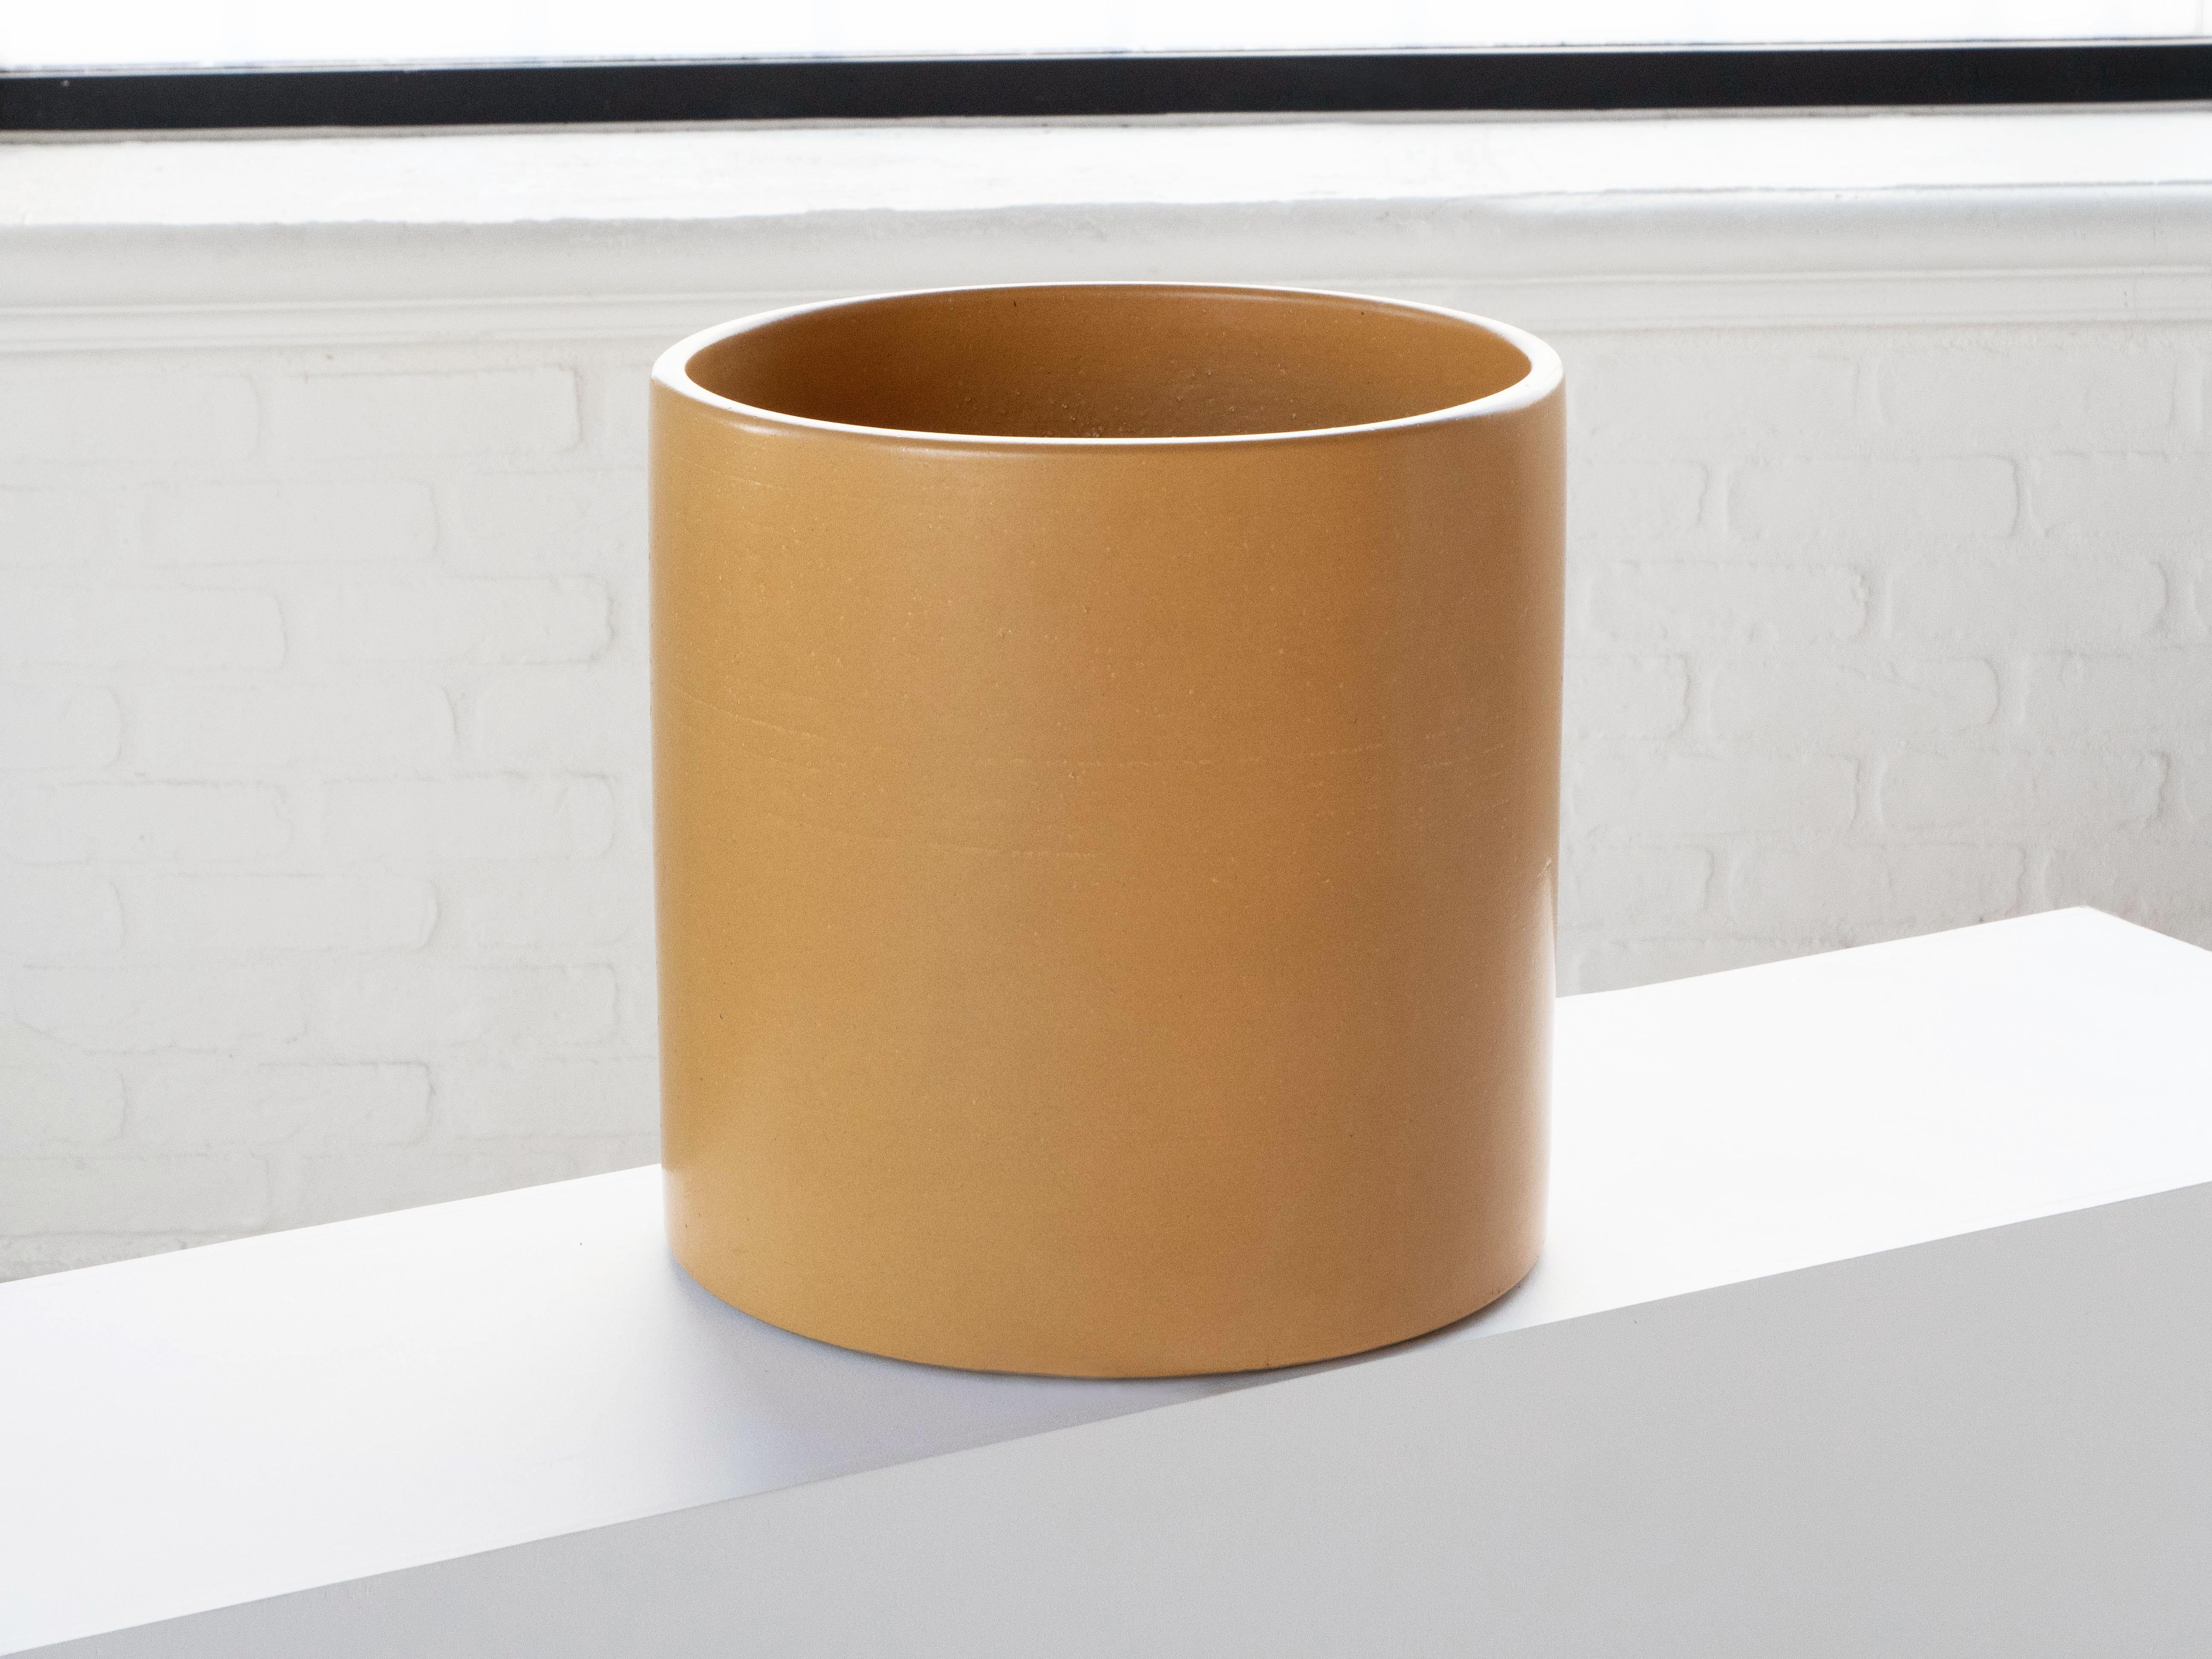 A Mid-Century Modern planter by LaGardo Tackett for California based company, architectural pottery, circa 1960s/1970s. It is in excellent condition. No cracks, chips, gouges, or scrapes. This glaze color is referred to by the original catalogue as